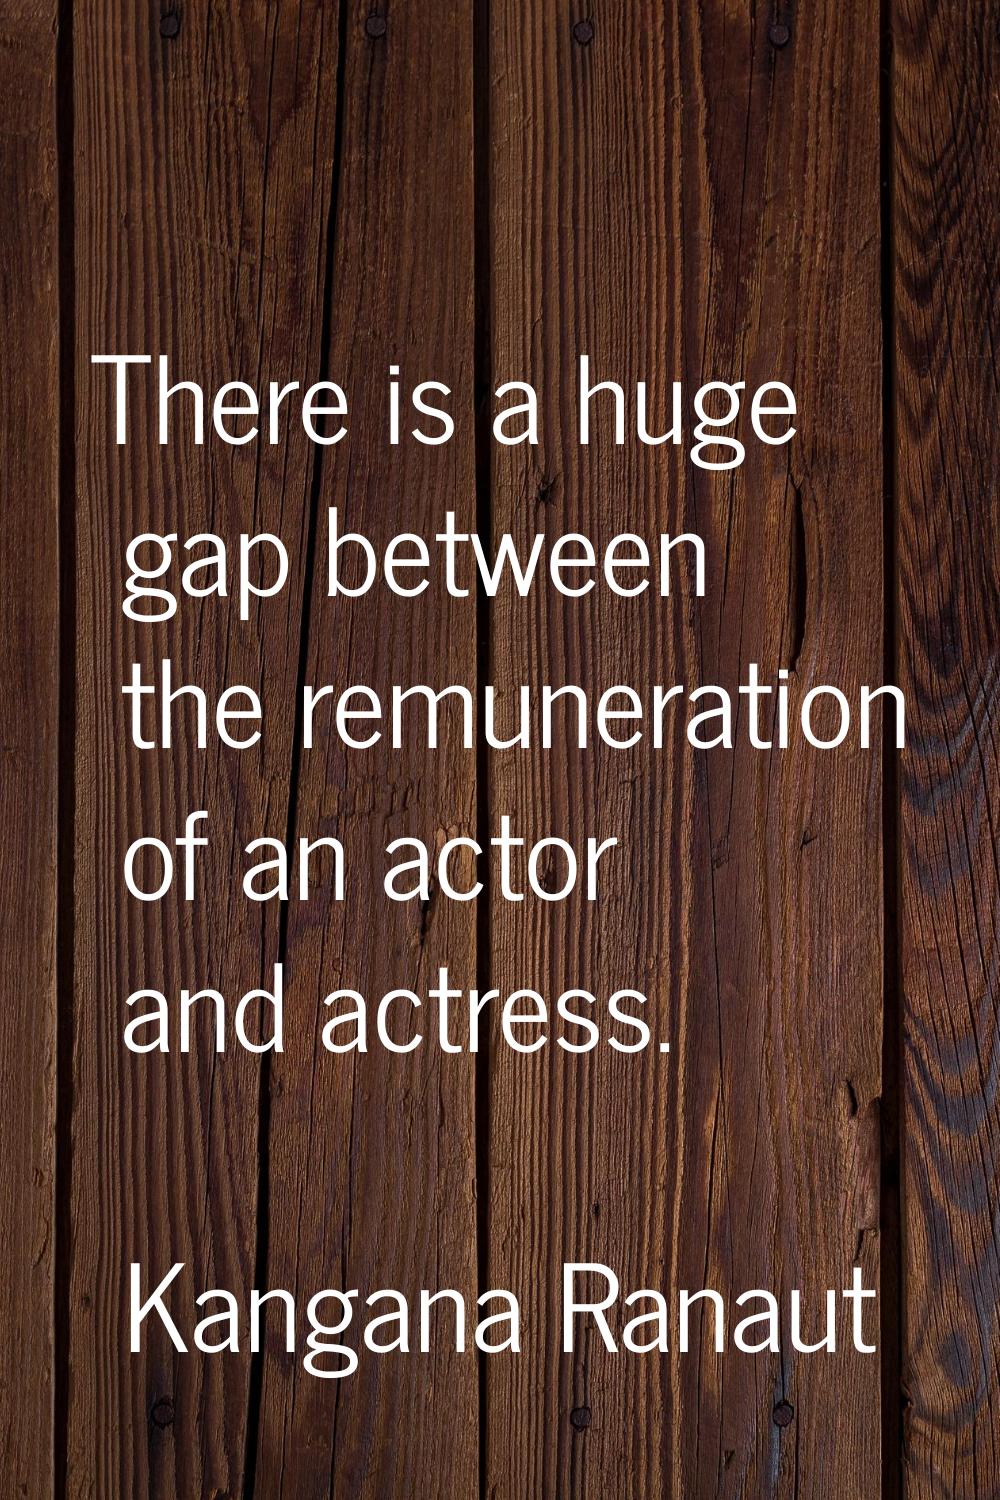 There is a huge gap between the remuneration of an actor and actress.